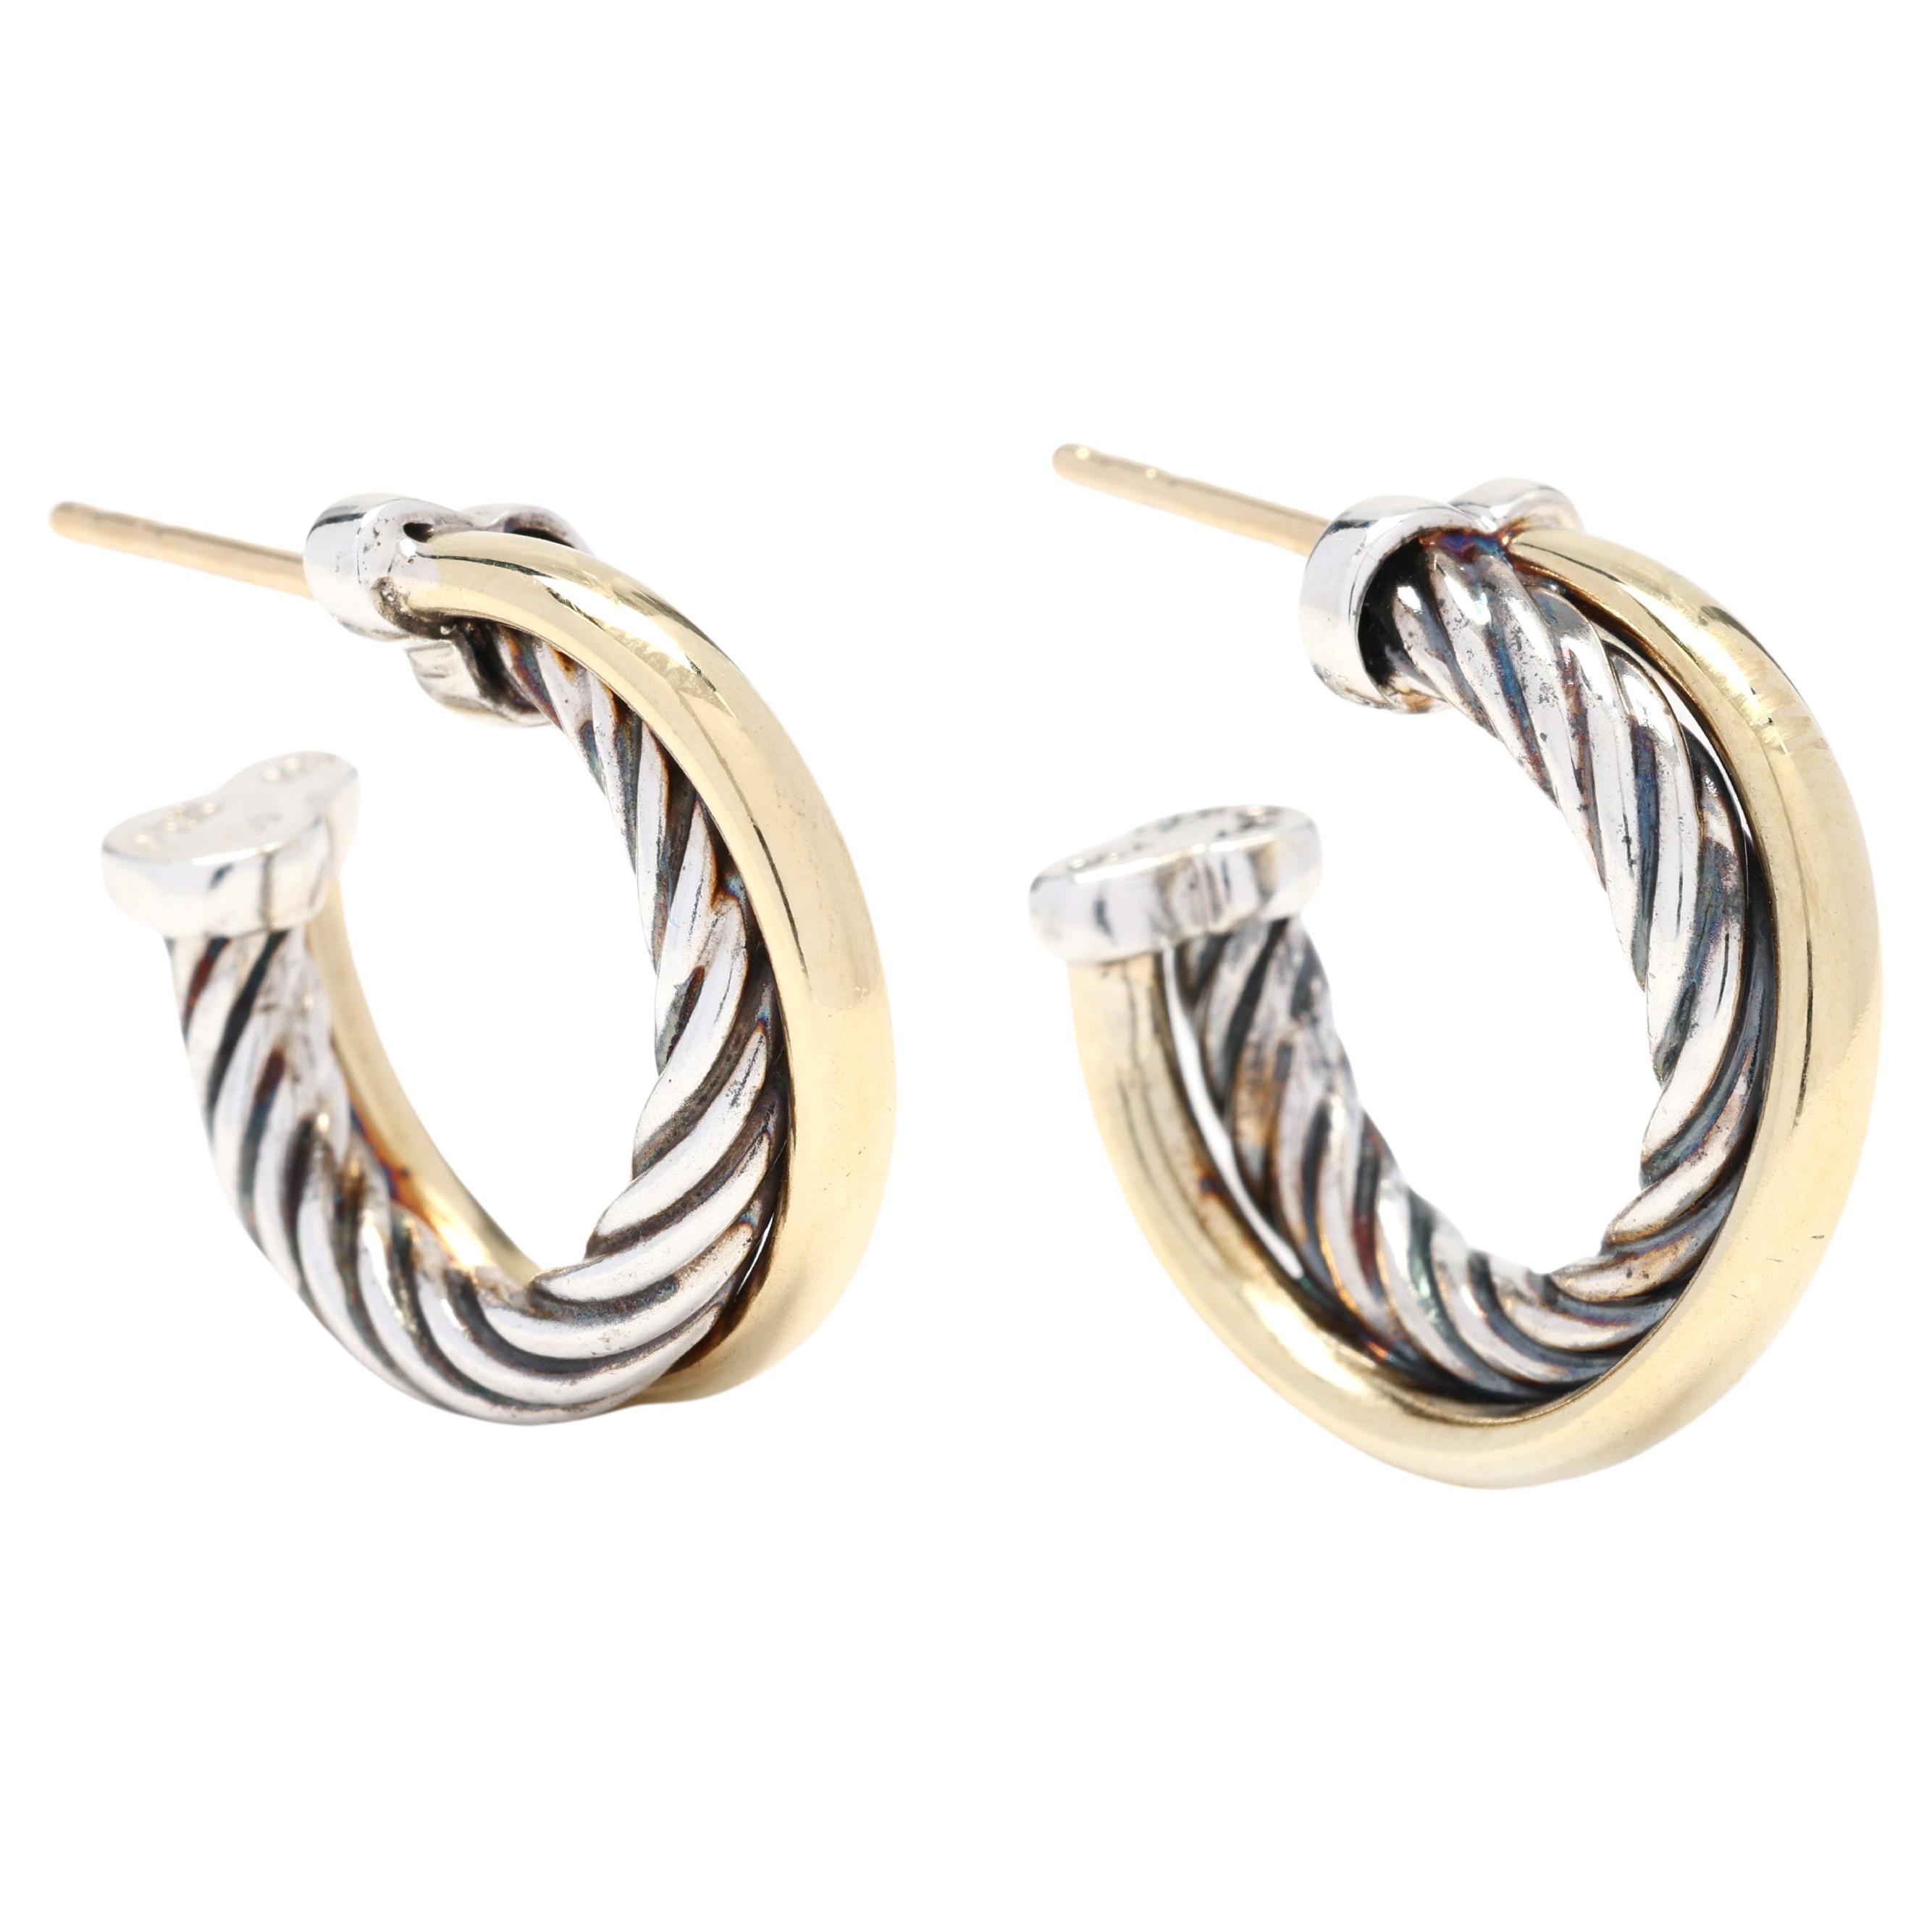 David Yurman Small Twisted Hoops, Sterling Silver and 18k Yellow Gold, Crossover